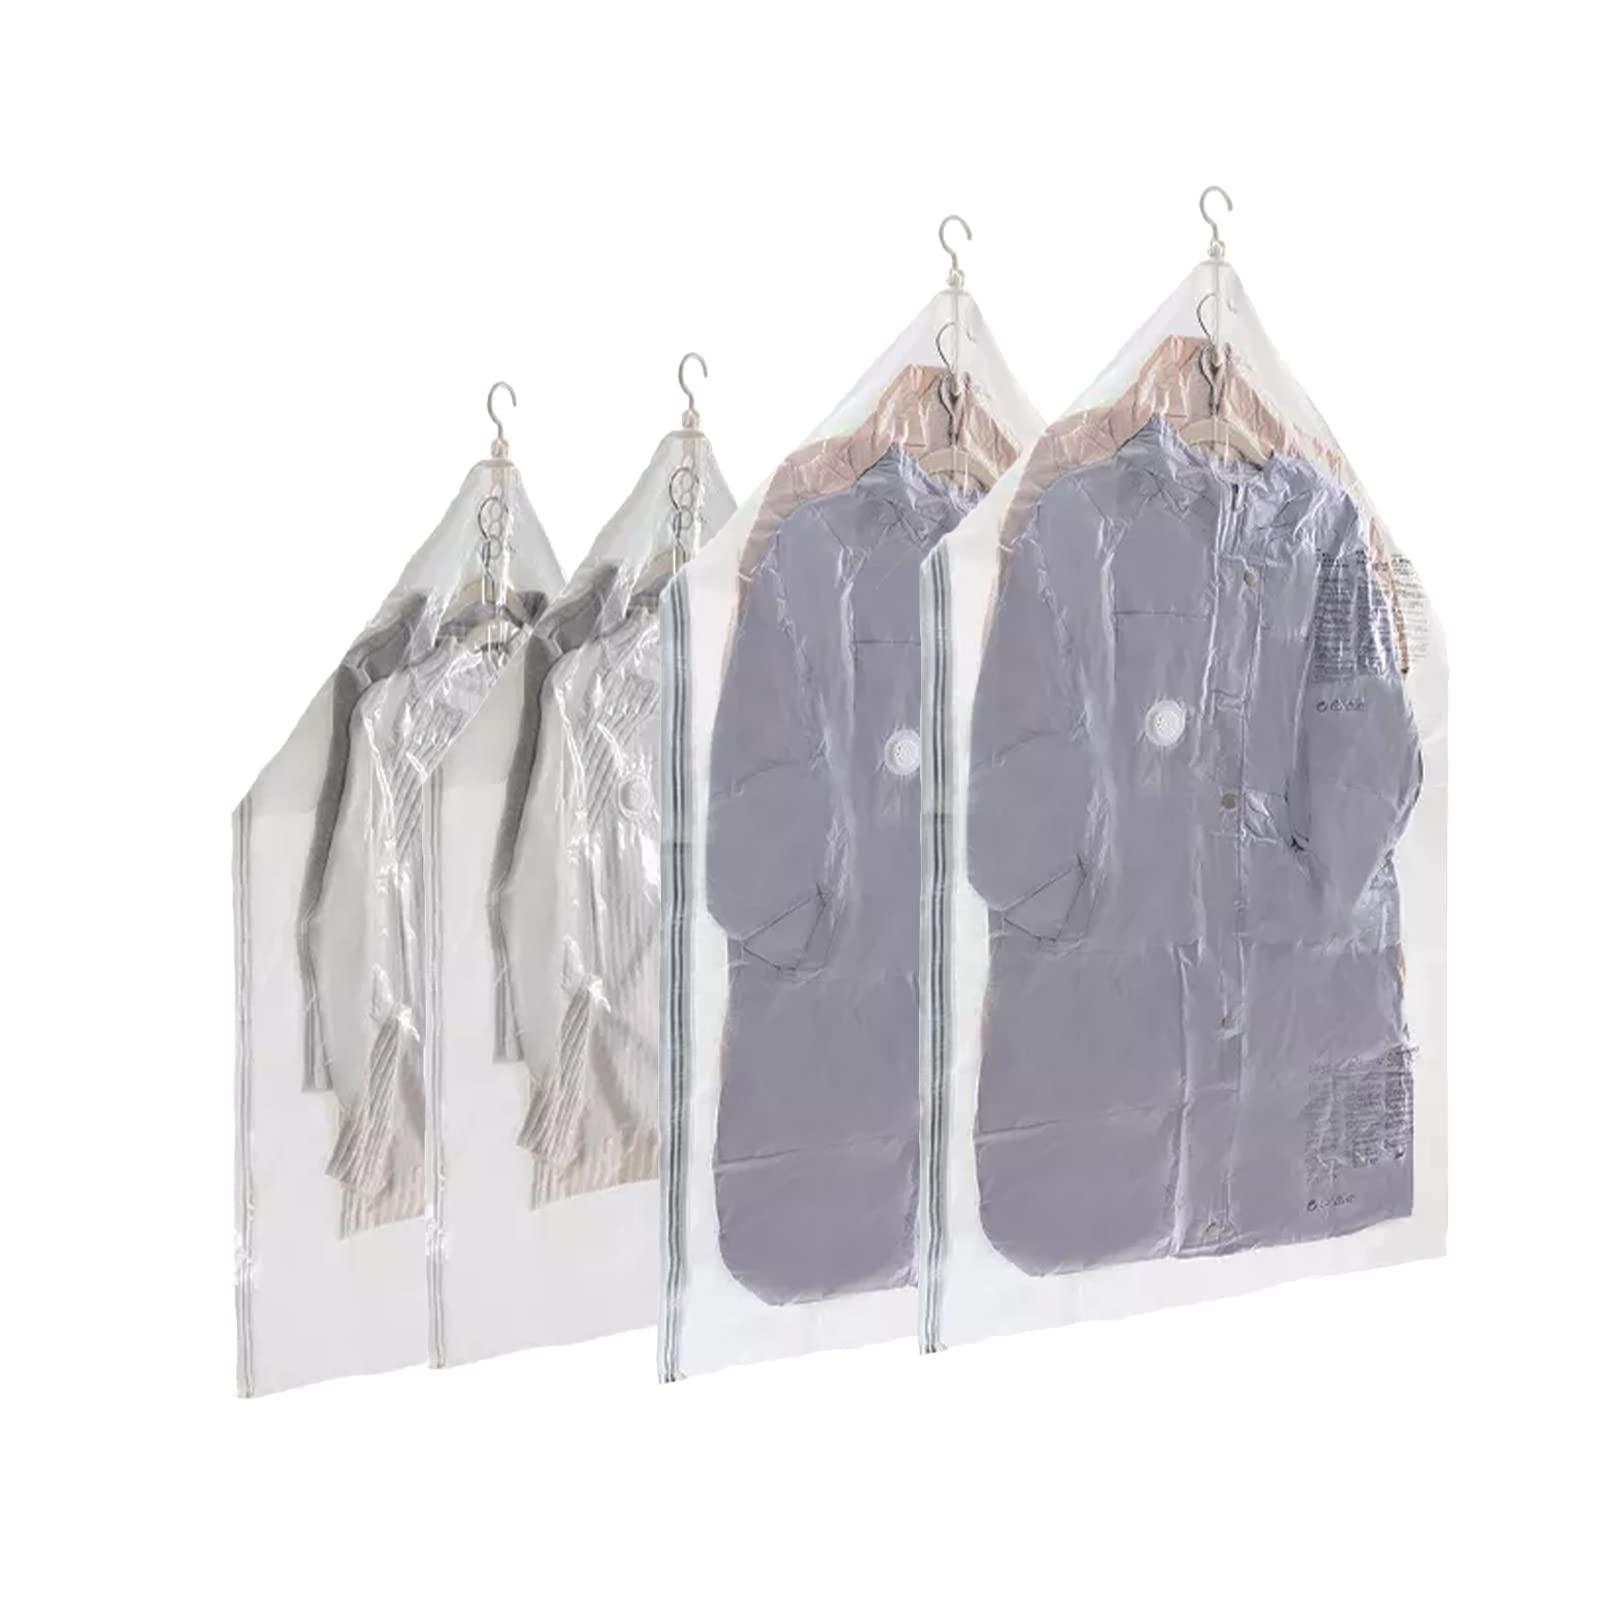 Hanging Vacuum Storage Bags for Clothes, Set of 4 (2 Long 53x27.6 inches, 2 Short 41.3x27.6 inches),Hanging Space Saver Bags for Suits, Dresses, Coat or Jackets, Reusable Closet Organizer